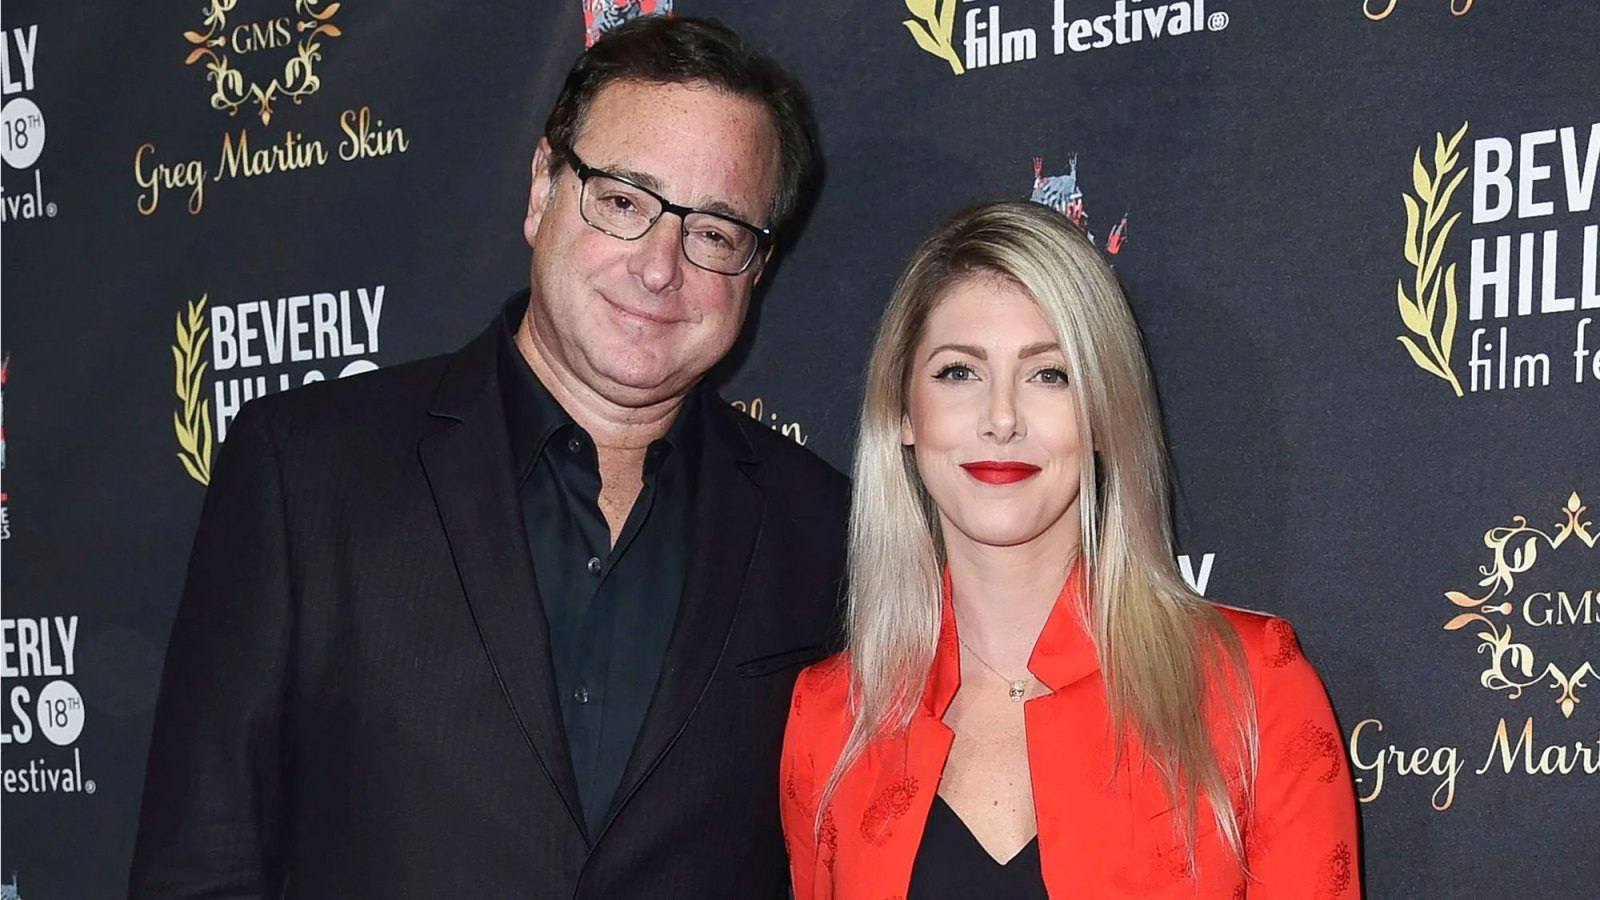 Bob Sagets Widow Kelly Rizzo Is Selling the Familys Home